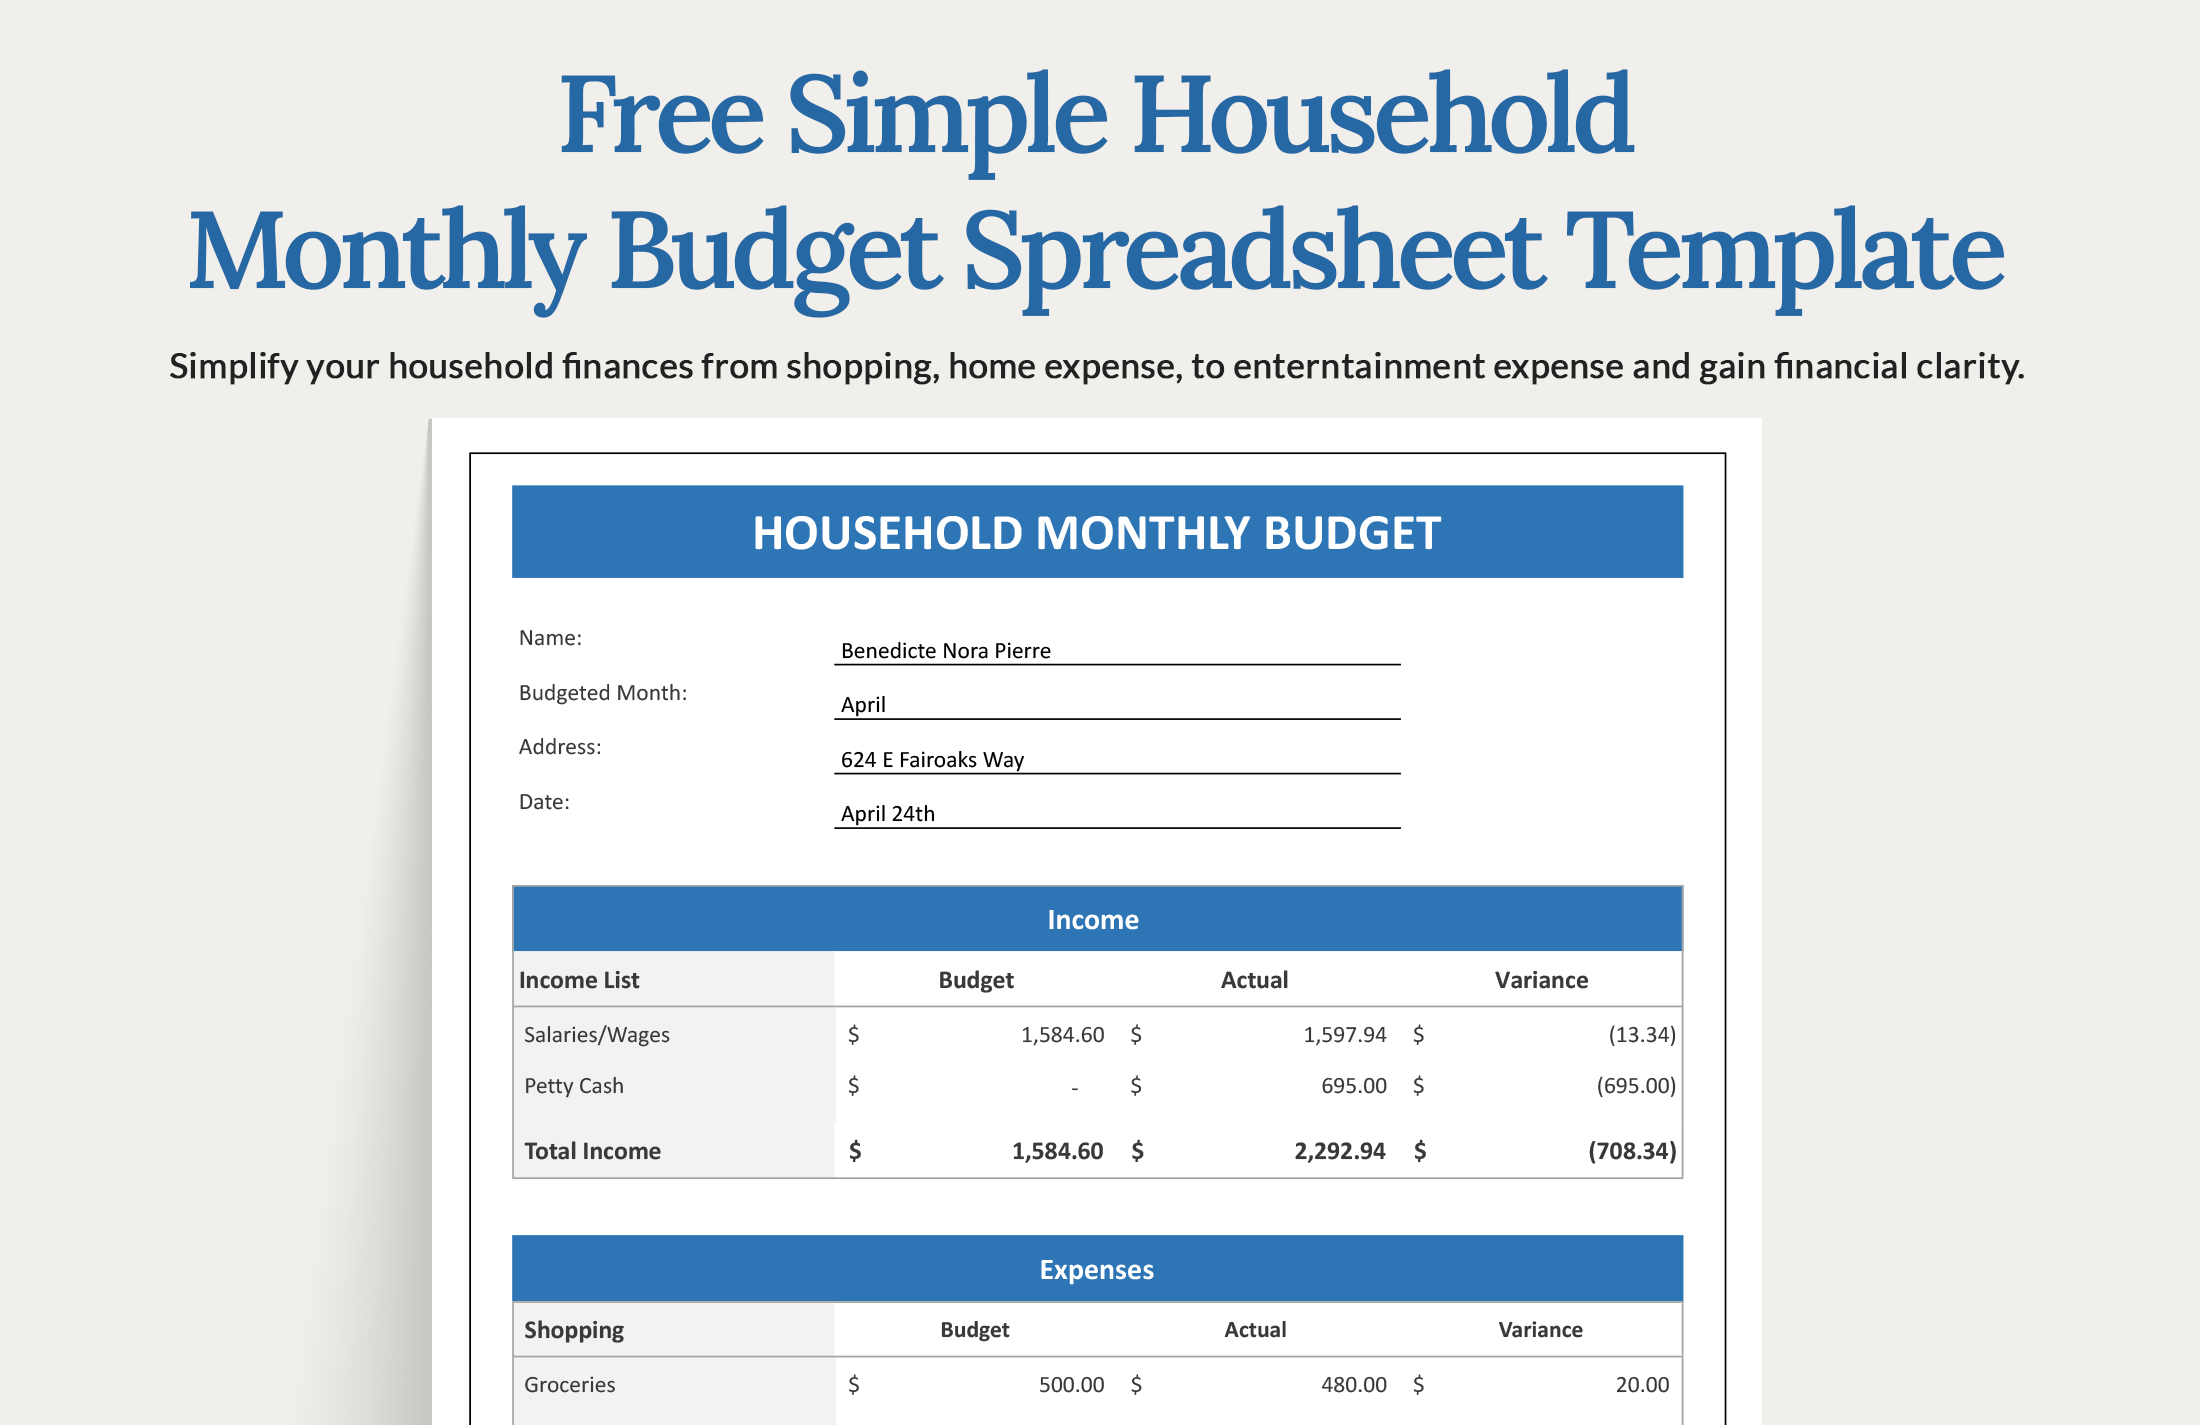 free-simple-household-monthly-budget-spreadsheet-template-google-docs-google-sheets-excel